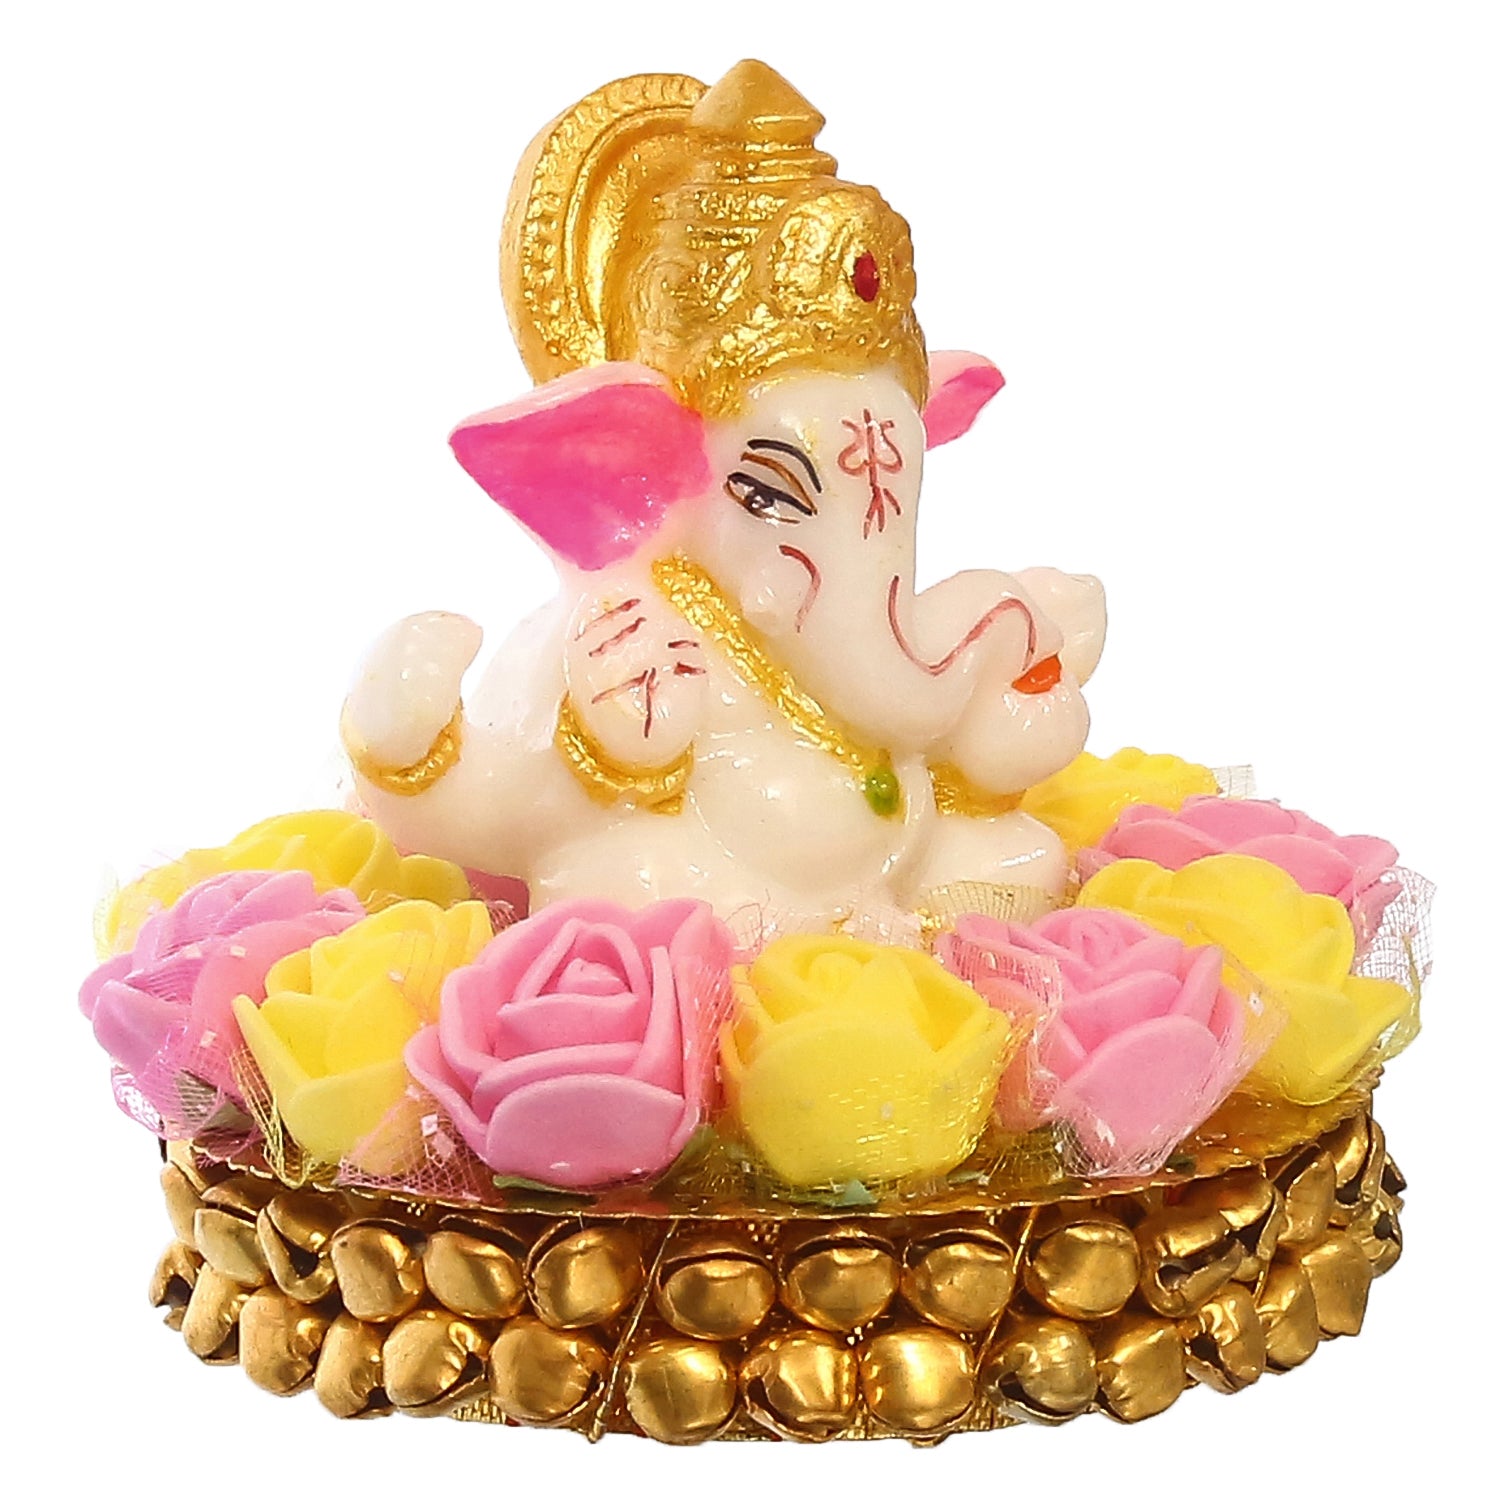 Golden and White Polyresin Lord Ganesha Idol on Decorative Handcrafted Plate with Pink and Yellow Flowers 4